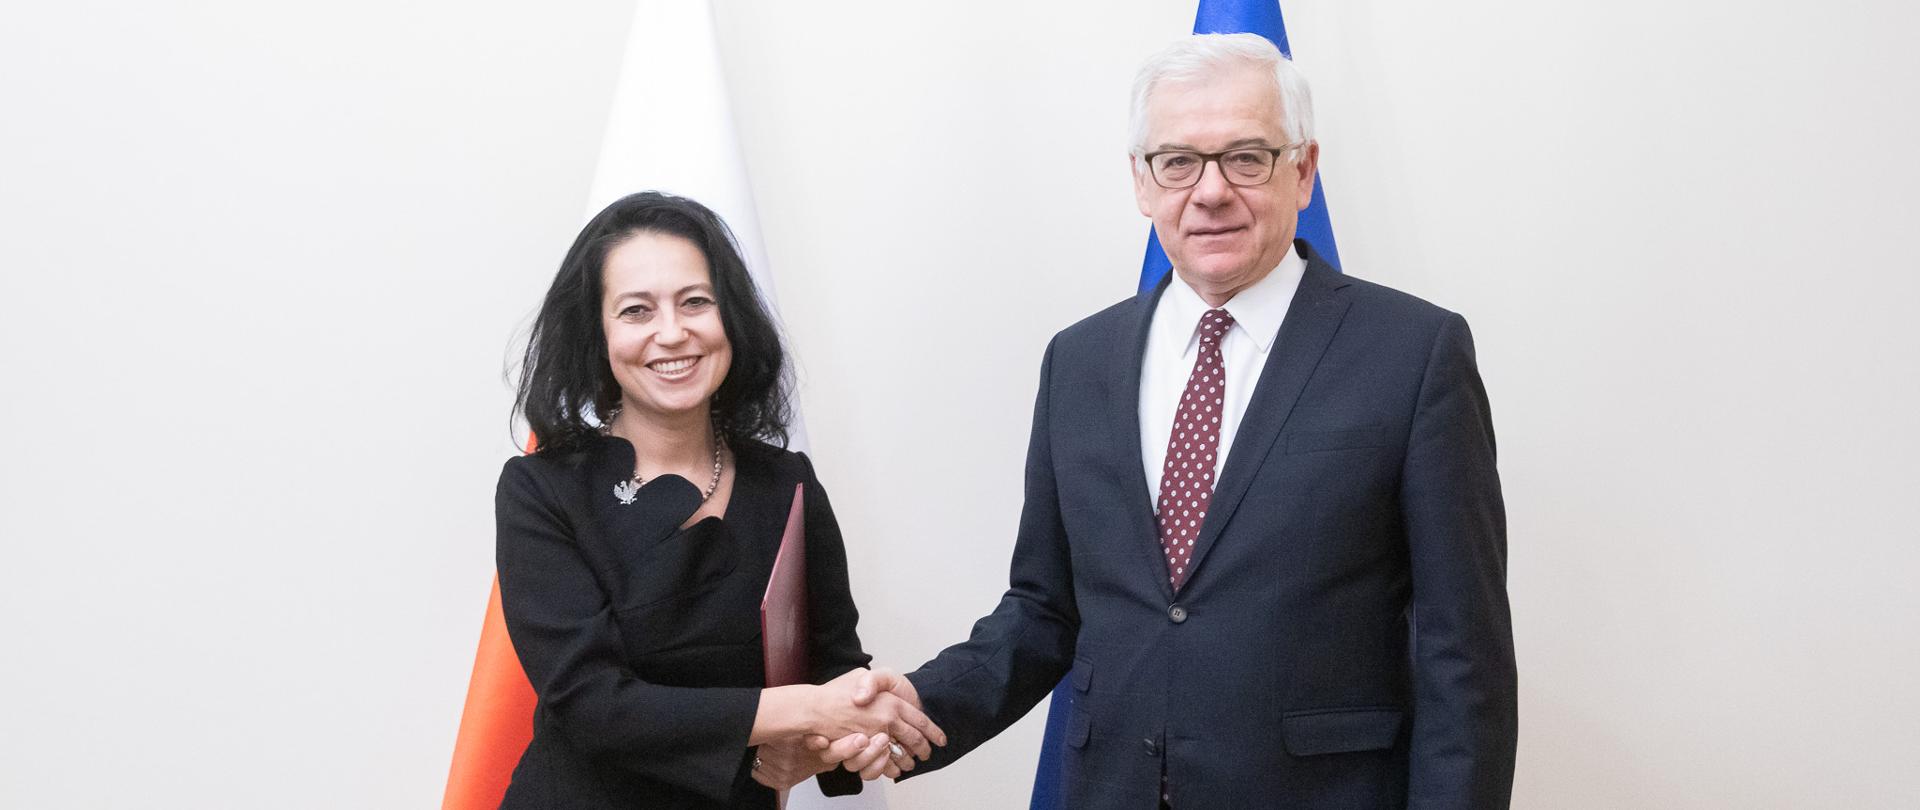 Minister Jacek Czaputowicz has presented Dominika Krois, Ph.D. with a nomination as the Permanent Representative of Poland to the UN Office and International Organisations in Vienna.